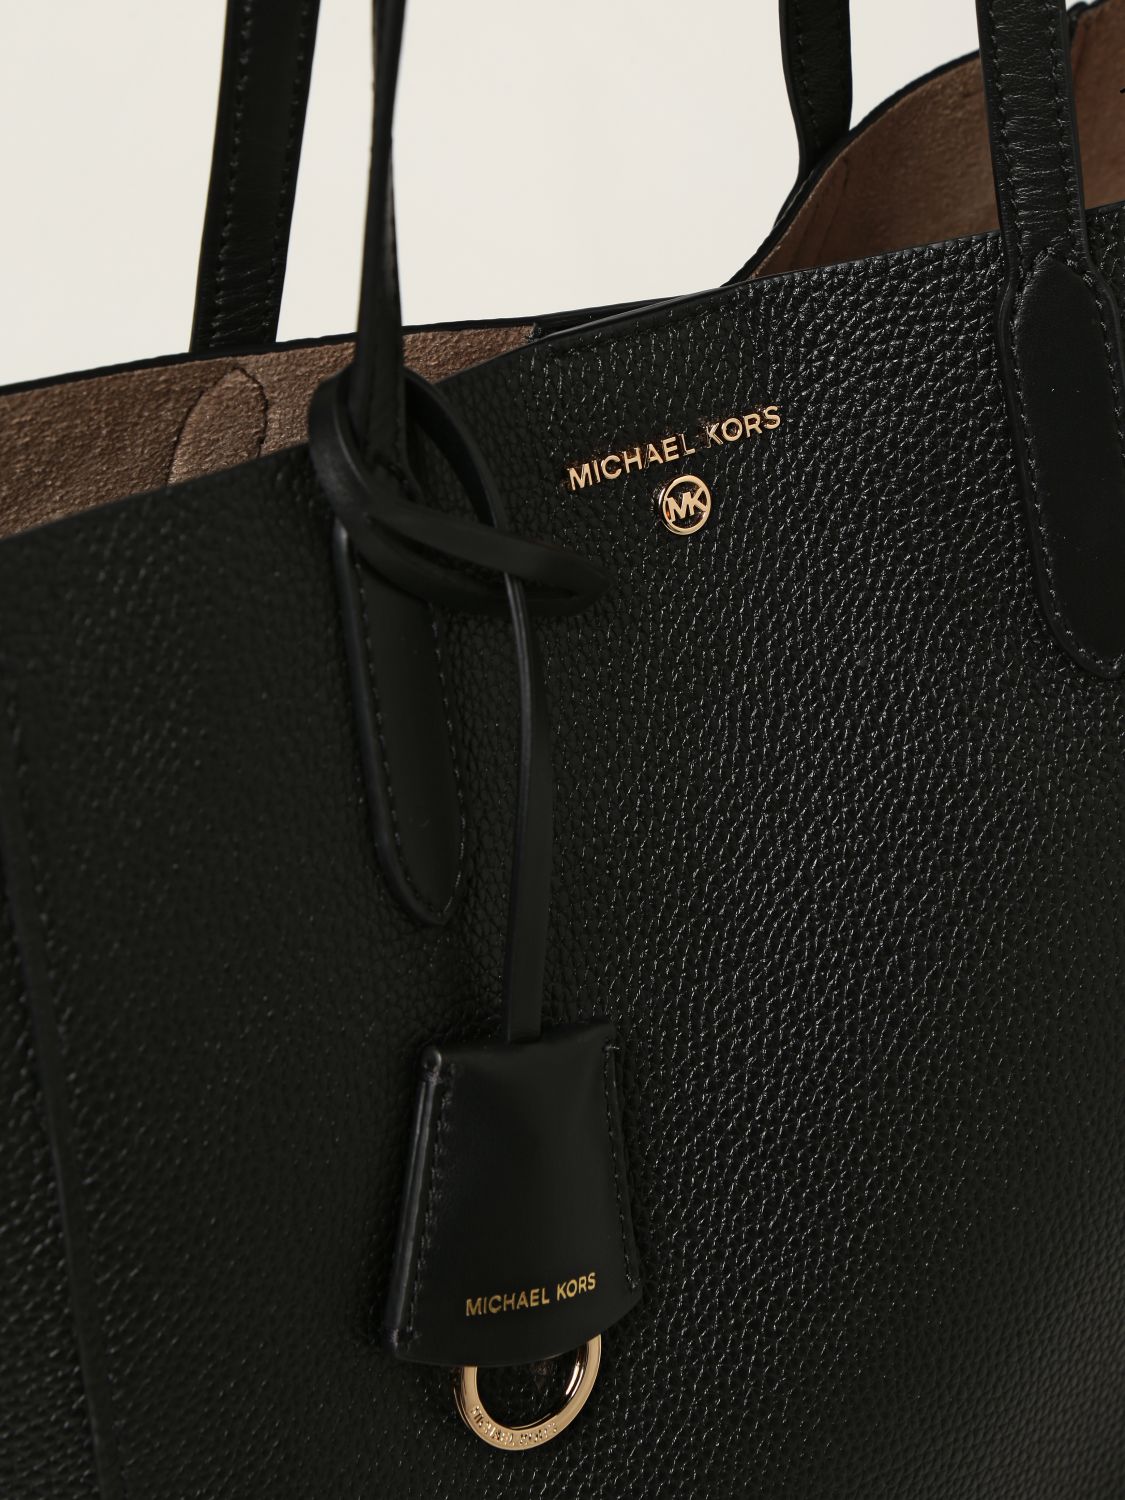 MICHAEL MICHAEL KORS: Sinclair leather | Tote Bags Michael Michael Kors Women Black | Tote Michael Michael Kors 30T1G5ST9L GIGLIO.COM